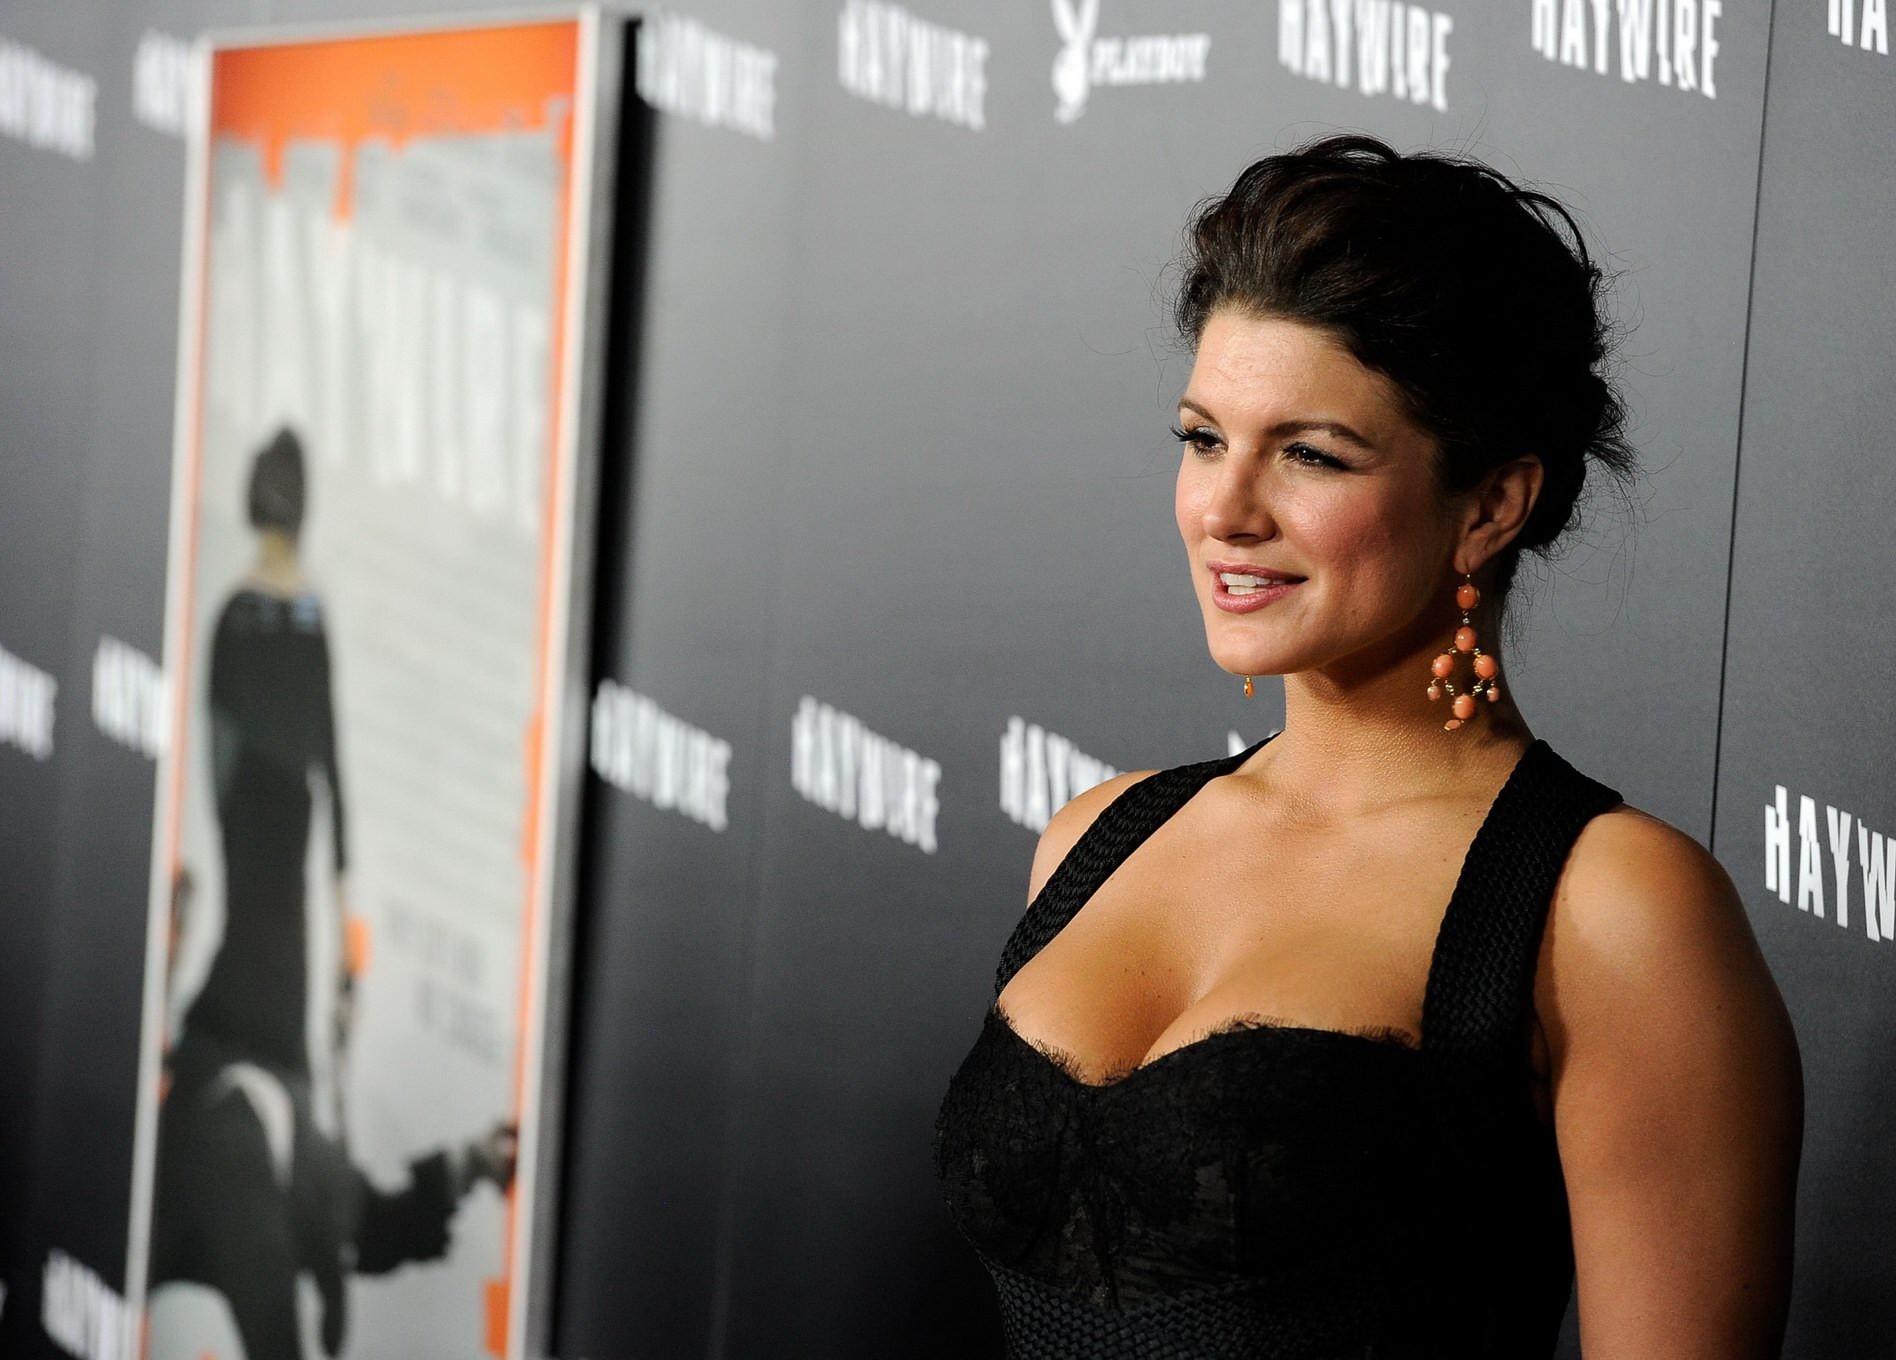 Gina Carano showing huge cleavage at the 'Haywire' premiere in LA #75276405